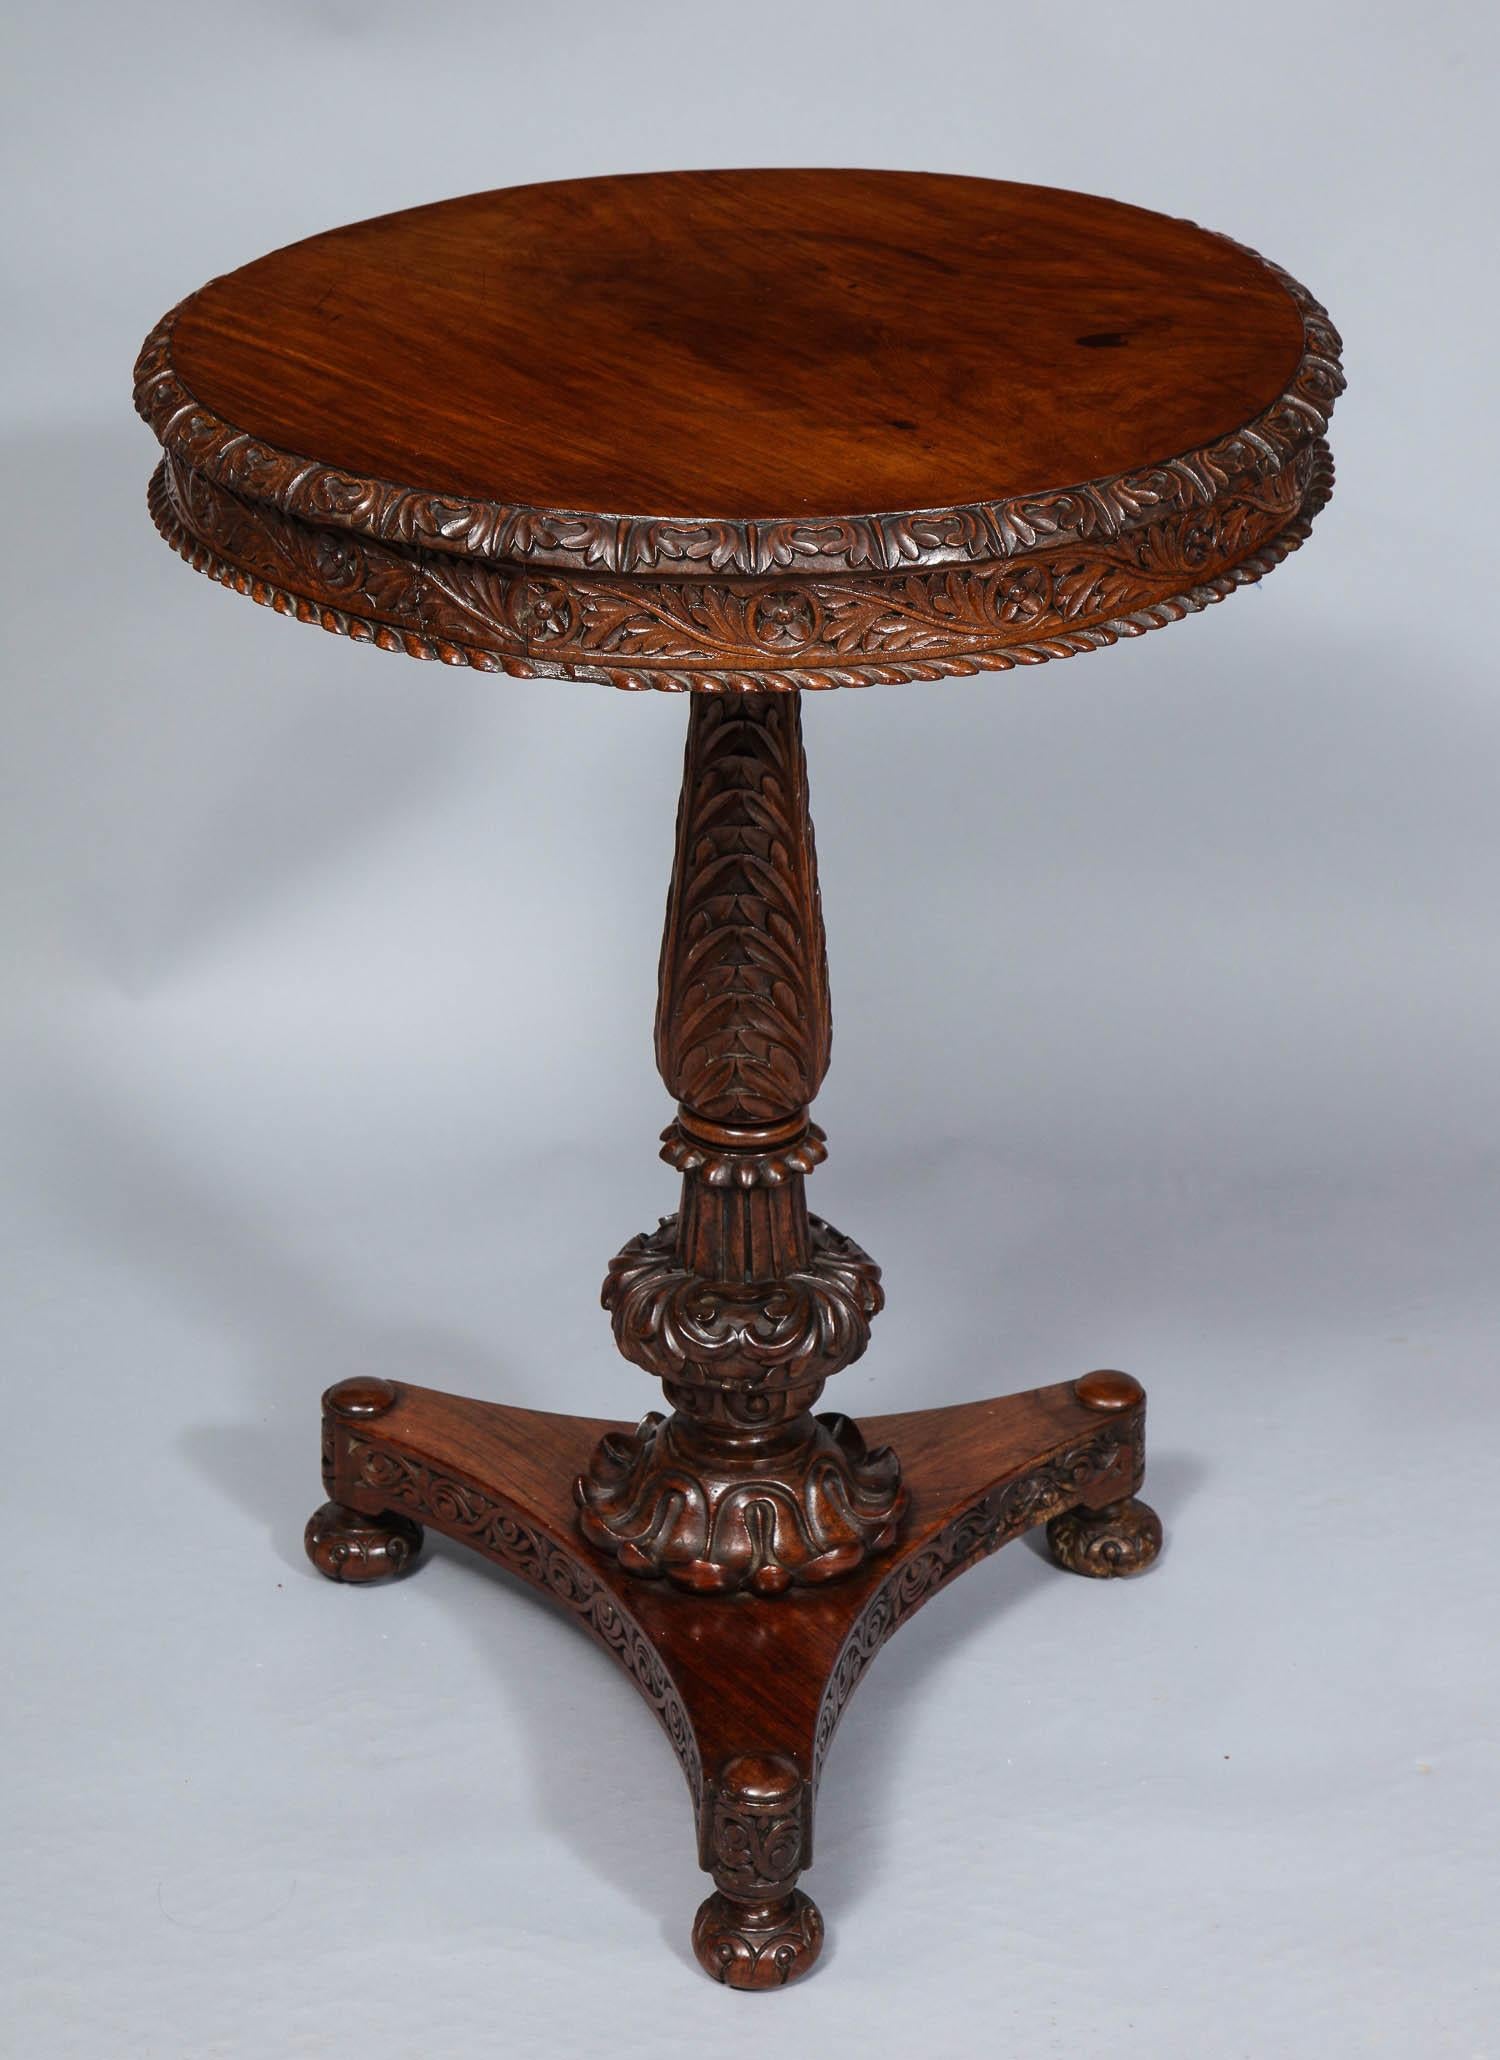 Fine carved padouk round tilt top table with acanthus leaf carved edge and apron over gadrooned molding, standing on turned and carved shaft over three footed platform base, all nicely conceived and executed, circa 1830-1840. Bearing a label from